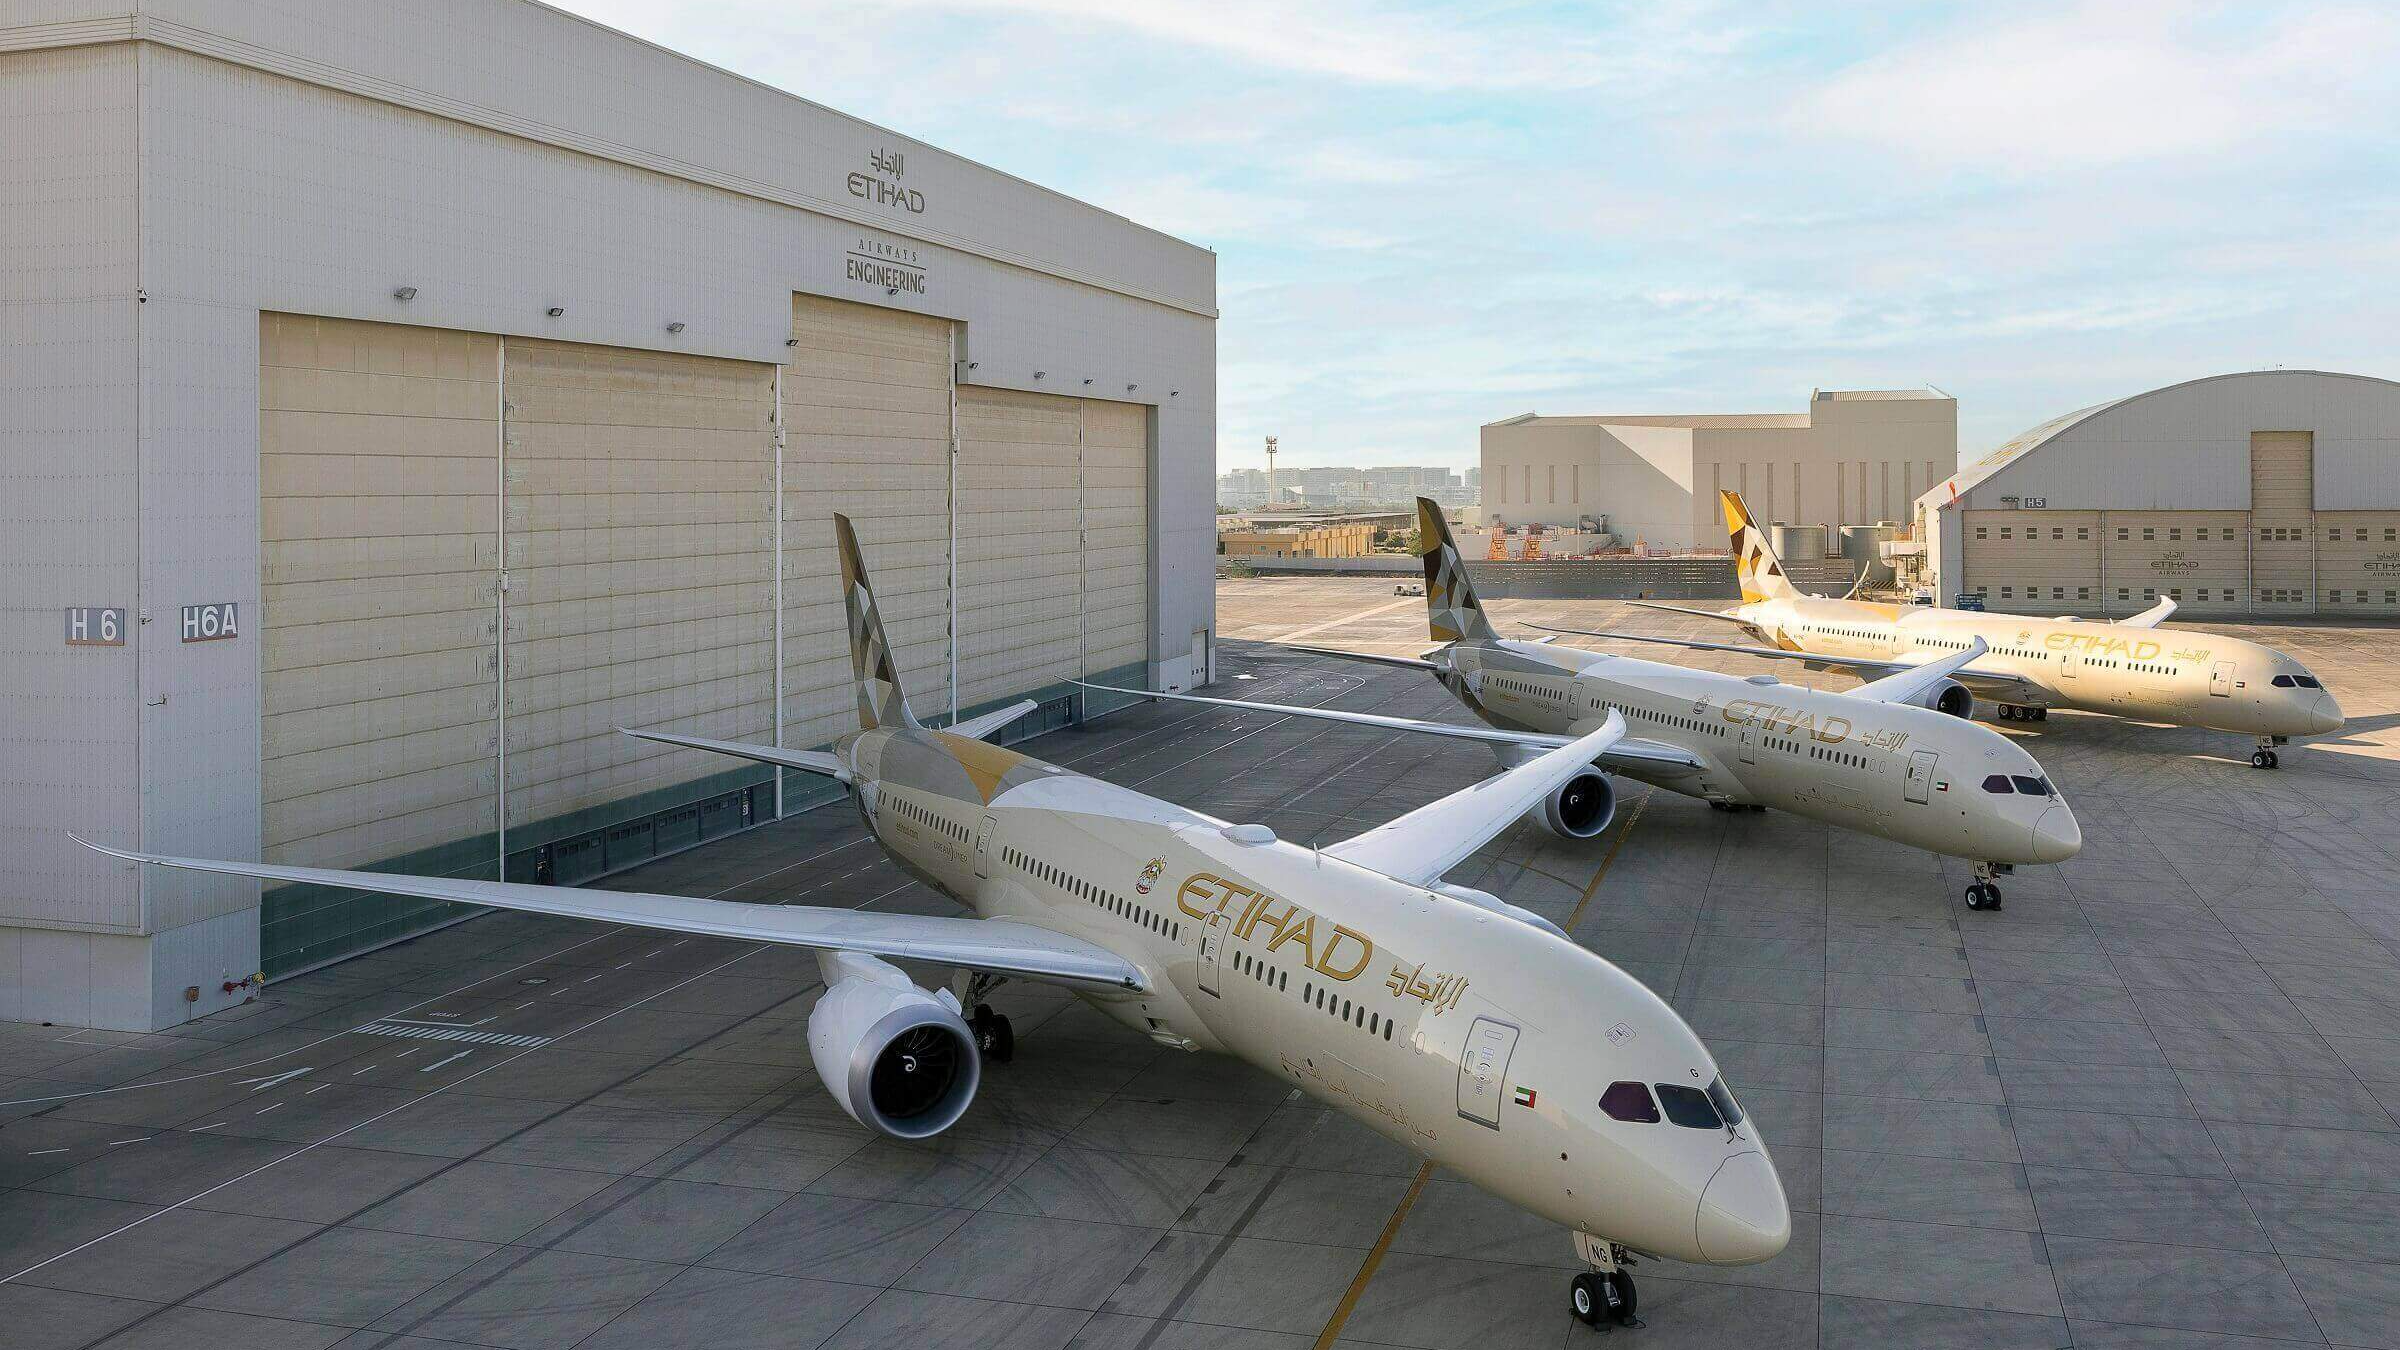 https://adgully.me/post/5619/etihad-adds-three-new-787-9-dreamliners-as-it-eyes-ambitious-growth